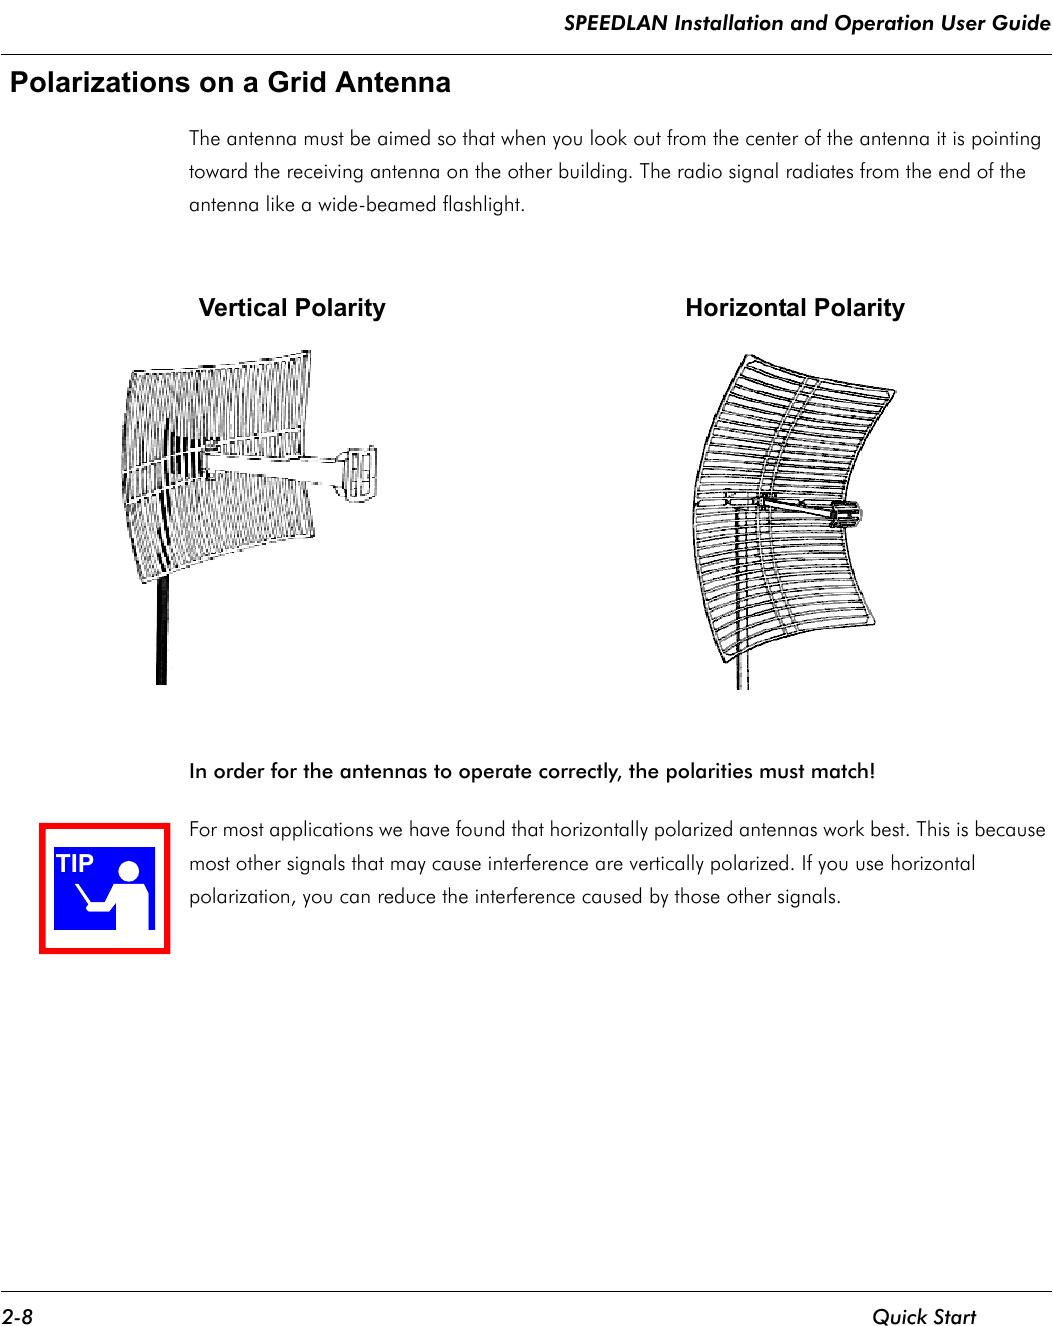 SPEEDLAN Installation and Operation User Guide 2-8 Quick Start Polarizations on a Grid Antenna The antenna must be aimed so that when you look out from the center of the antenna it is pointing toward the receiving antenna on the other building. The radio signal radiates from the end of the antenna like a wide-beamed flashlight.                            Vertical Polarity                                           Horizontal PolarityIn order for the antennas to operate correctly, the polarities must match!   For most applications we have found that horizontally polarized antennas work best. This is because most other signals that may cause interference are vertically polarized. If you use horizontal polarization, you can reduce the interference caused by those other signals. TIP